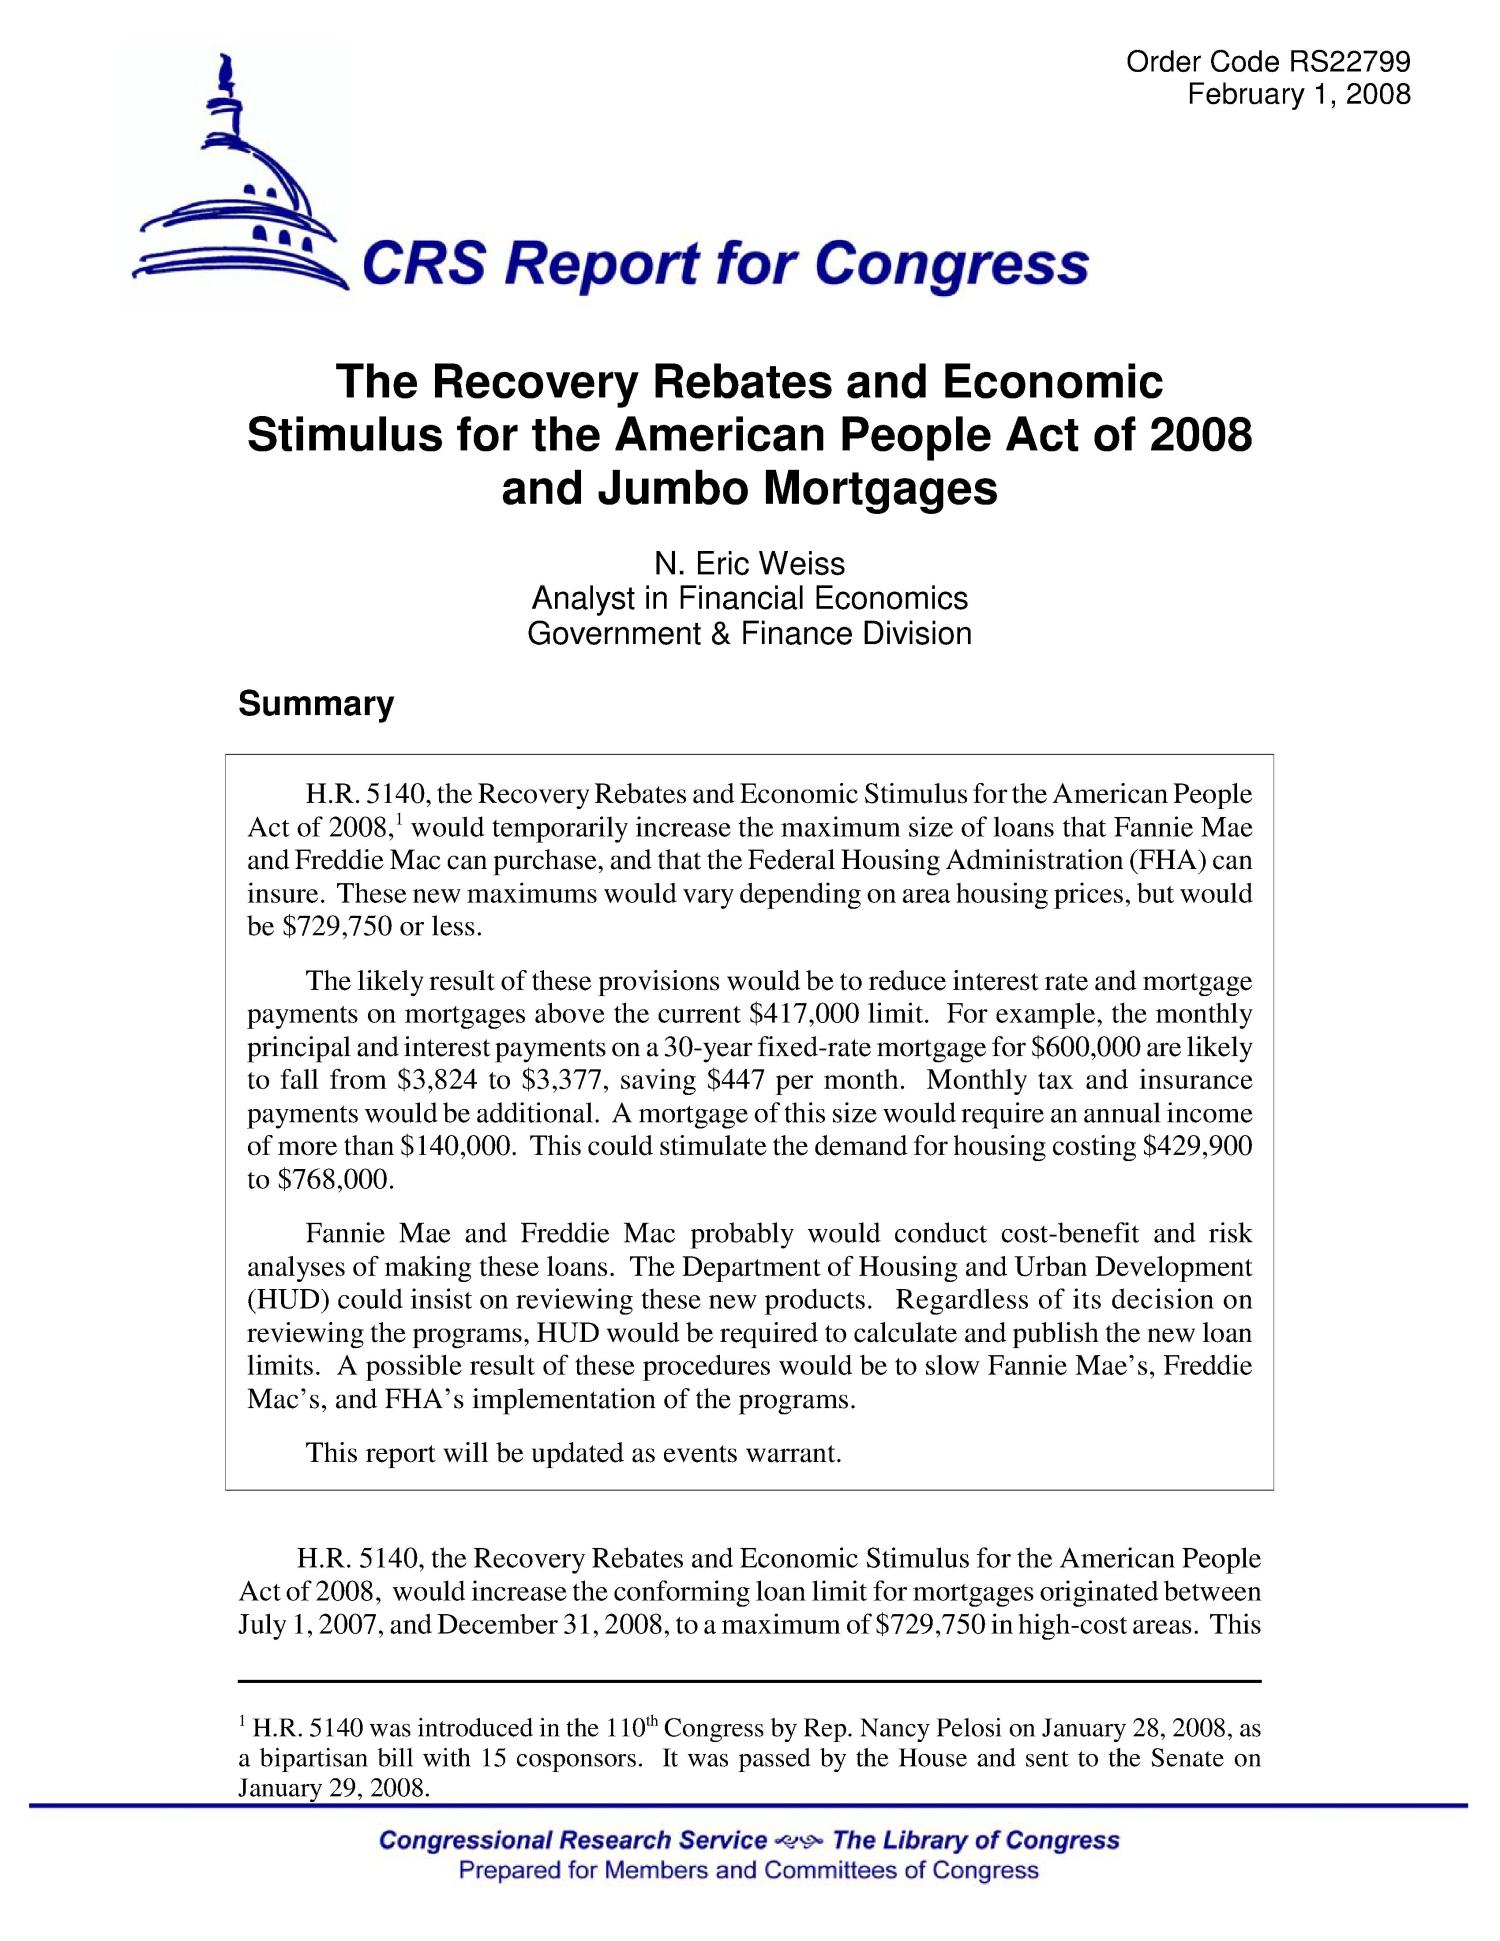 The Recovery Rebates And Economic Stimulus For The American People Act 